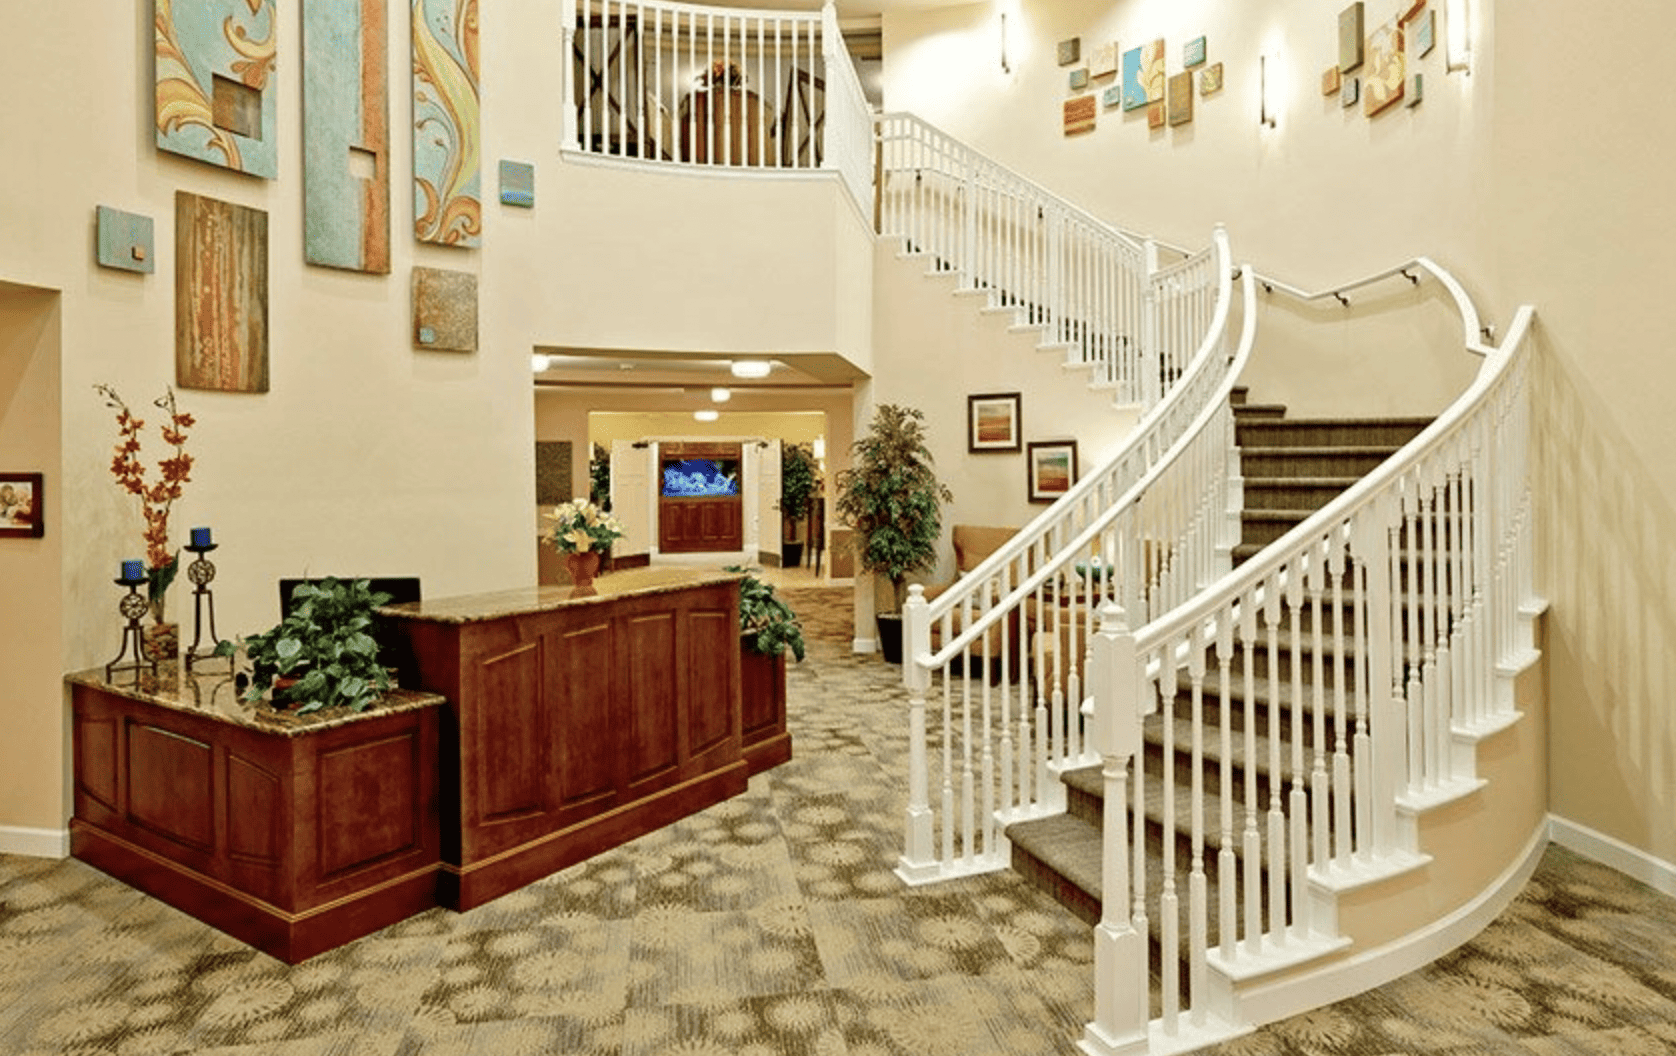 An interior staircase and reception area at MorningStar Assisted Living & Memory Care at Mountain Shadows